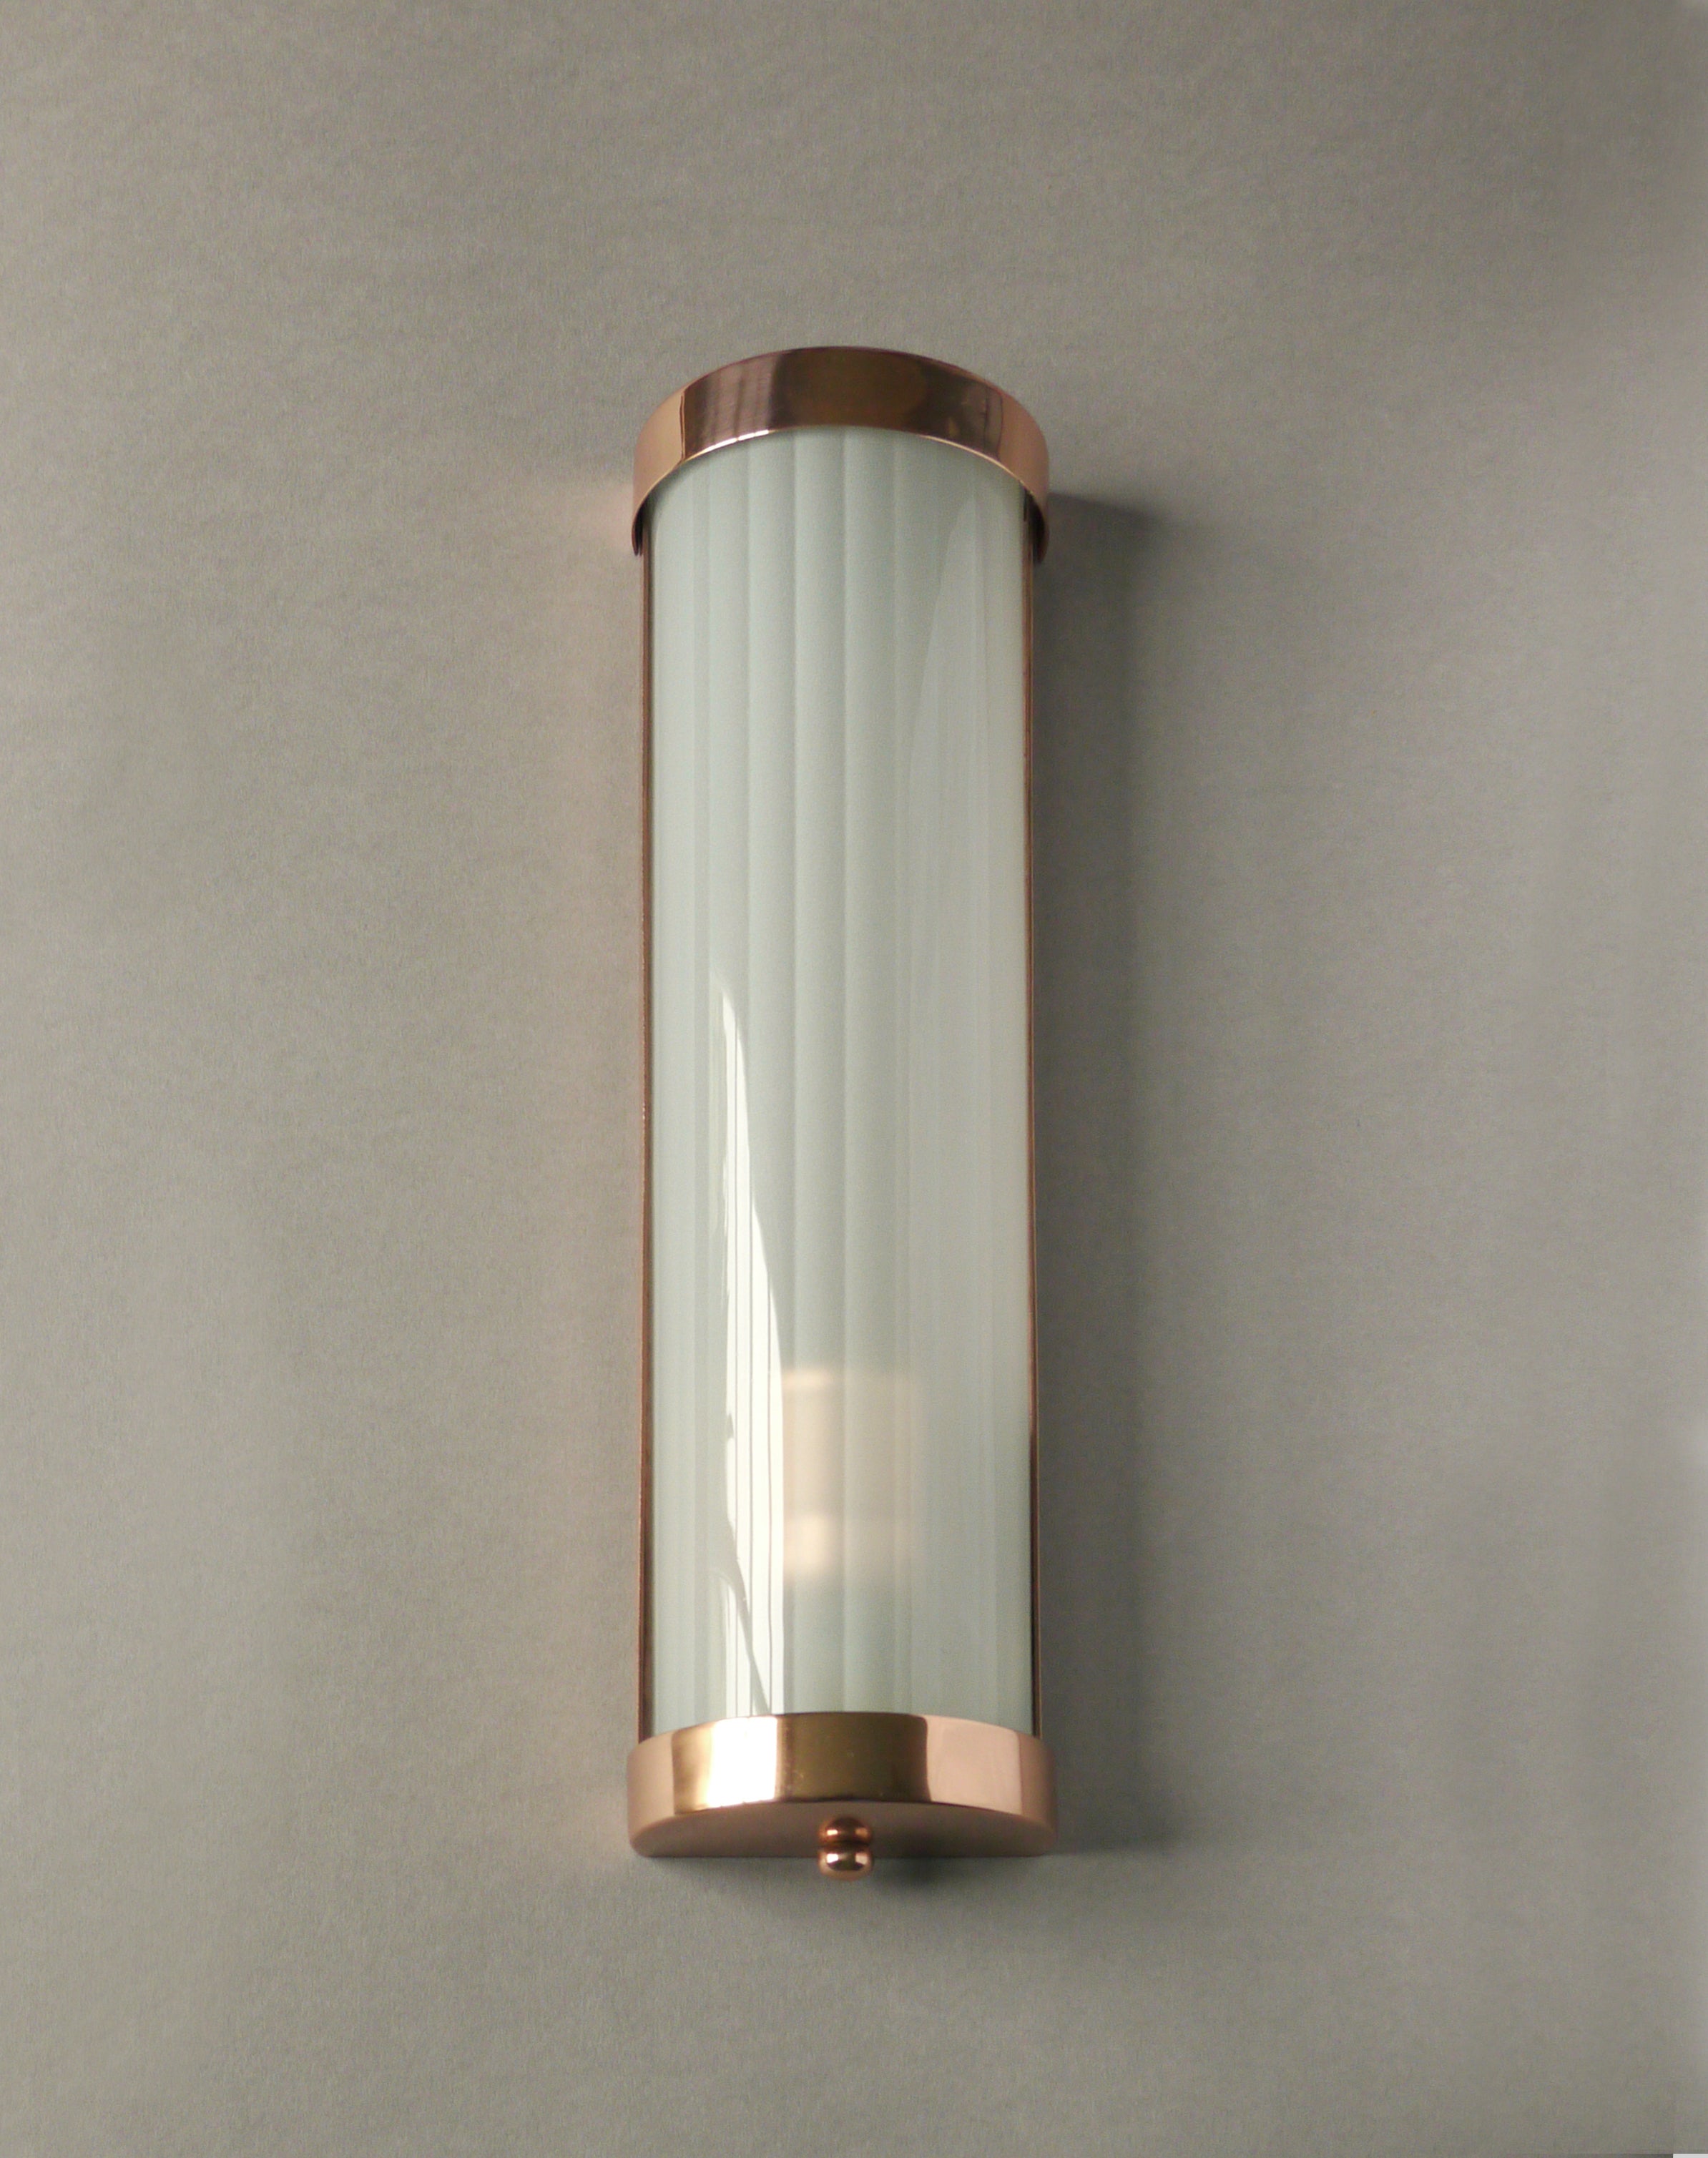 Deco Style Wall Light, Copper, for Bathroom